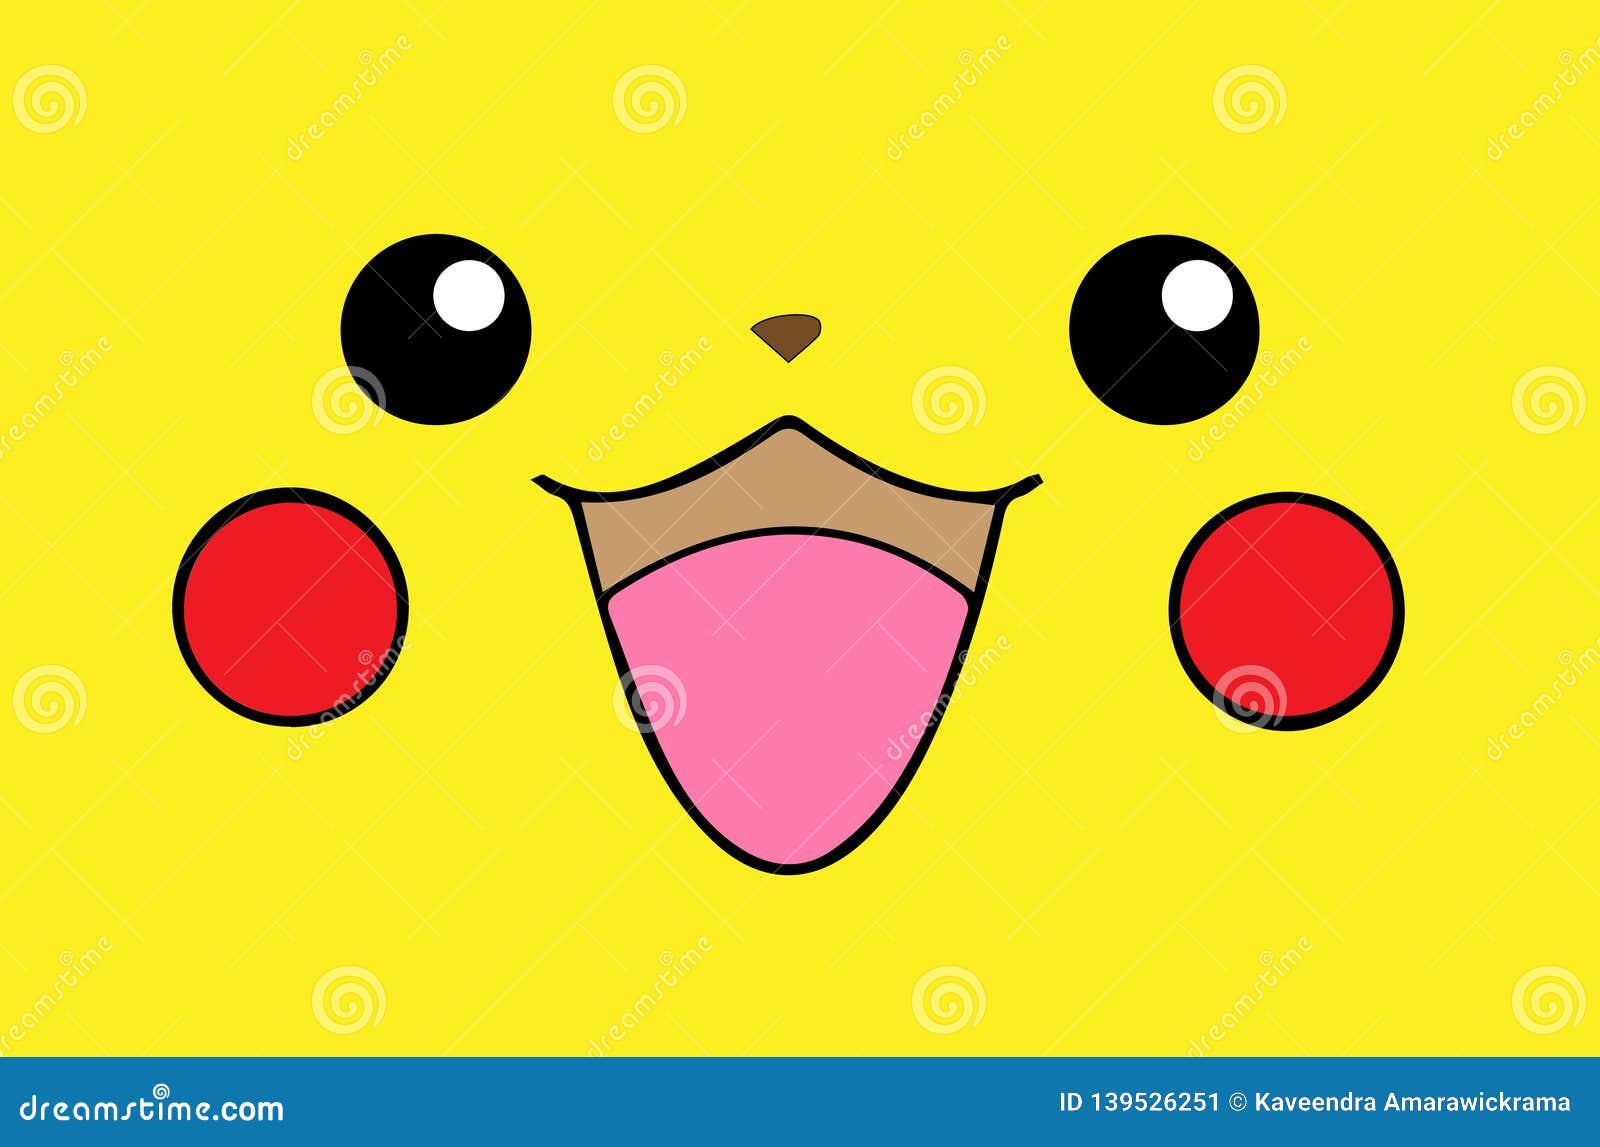 Abstract Pikachu Face Design Illustration Editorial Photo Illustration Of Work Time